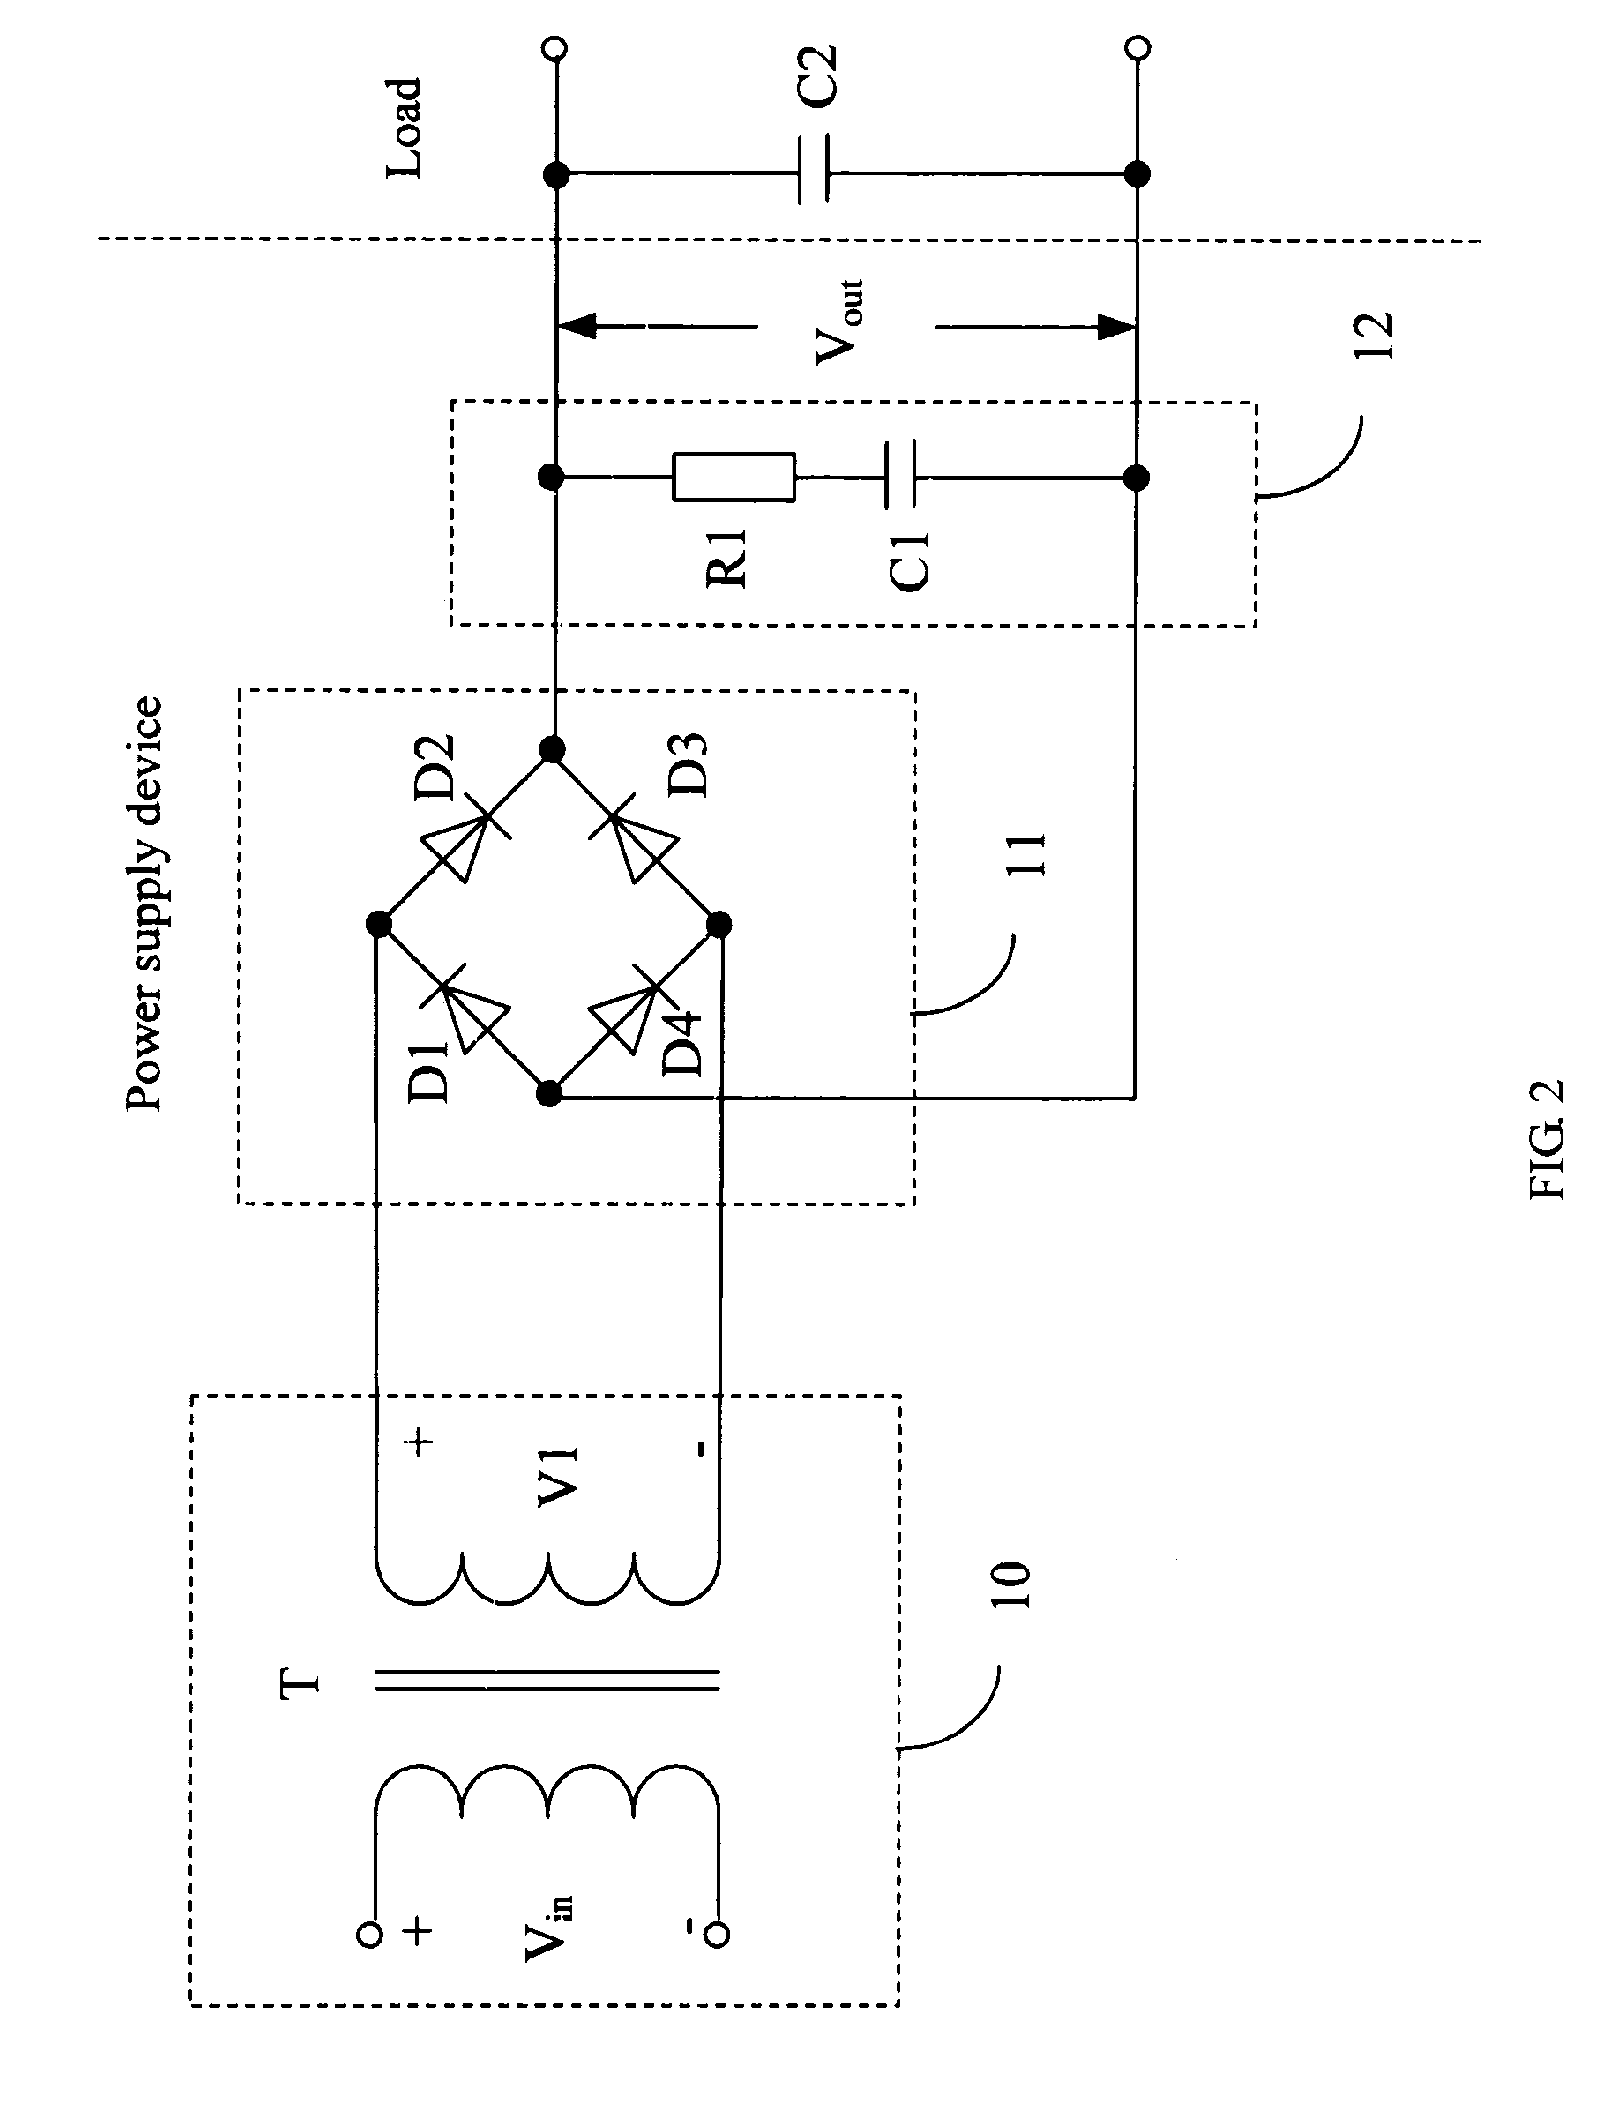 Power supply device with inrush current control circuit